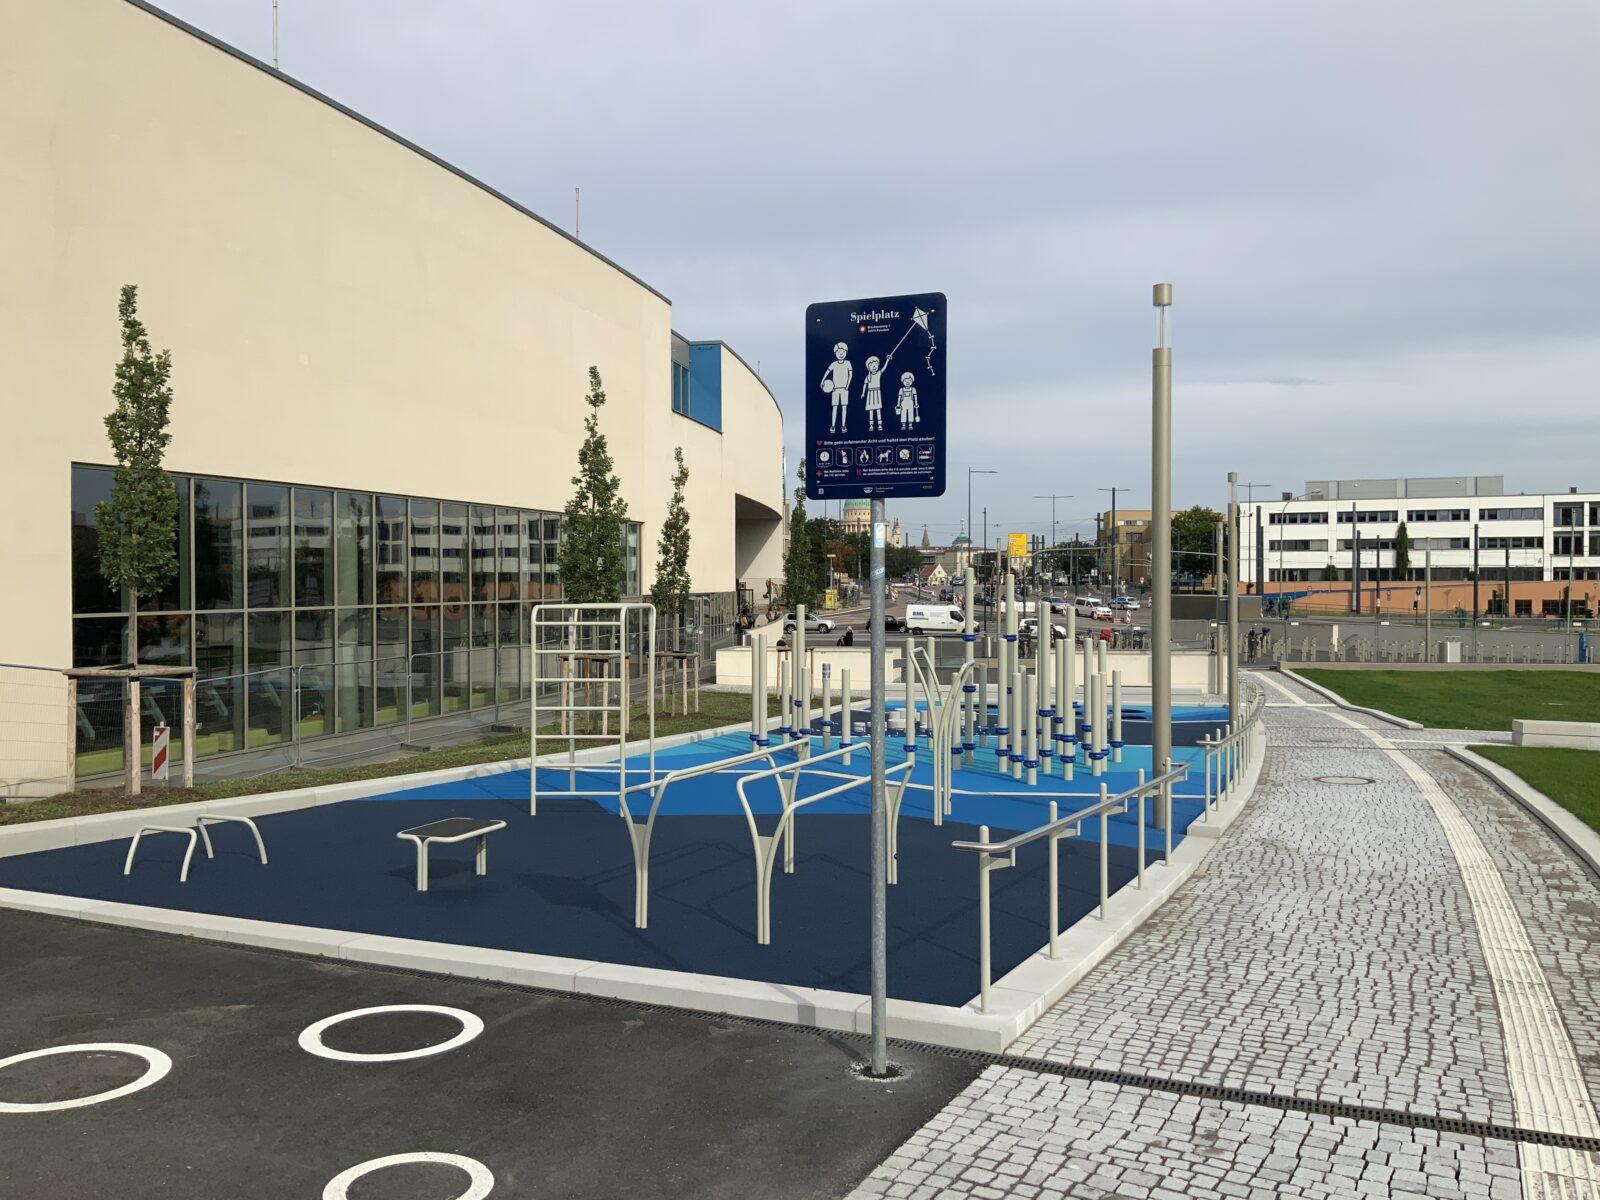 Outdoor durable fitness equipment in Potsdam Berlin made by NOORD